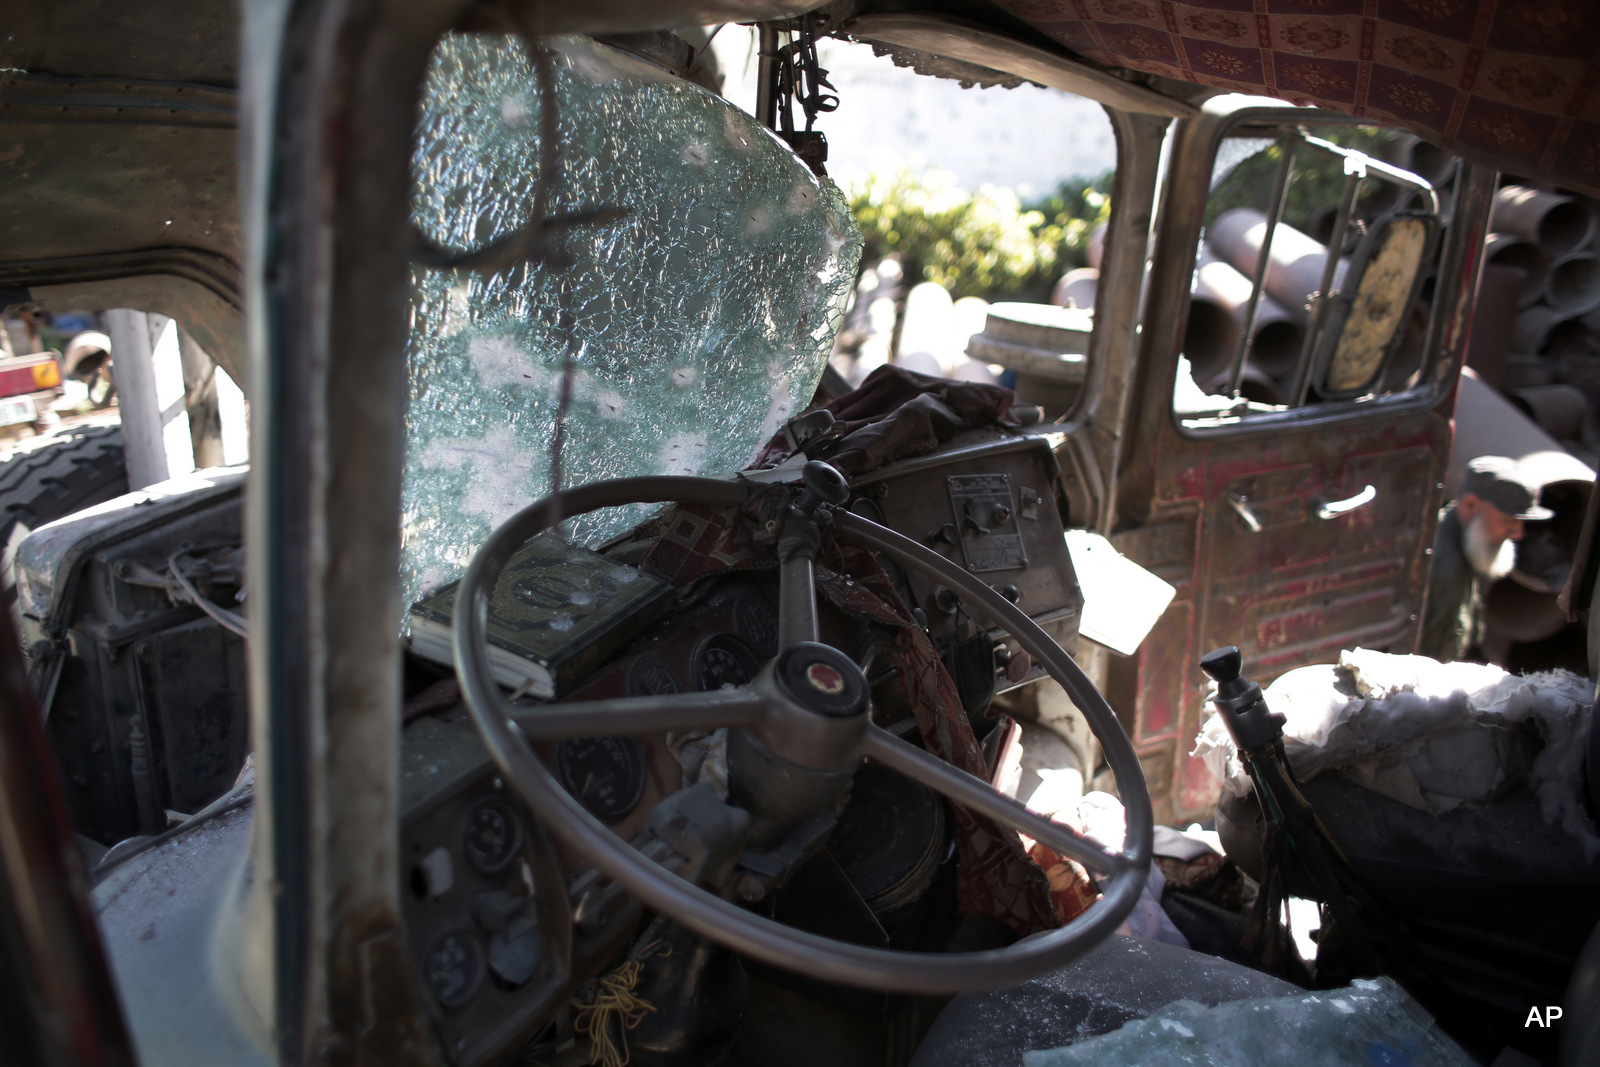 A Palestinian man inspects a damaged artesian well drilling truck after an early morning Israeli airstrike hit a workshop in Gaza City, Thursday, May 5, 2016. (AP Photo/ Khalil Hamra)